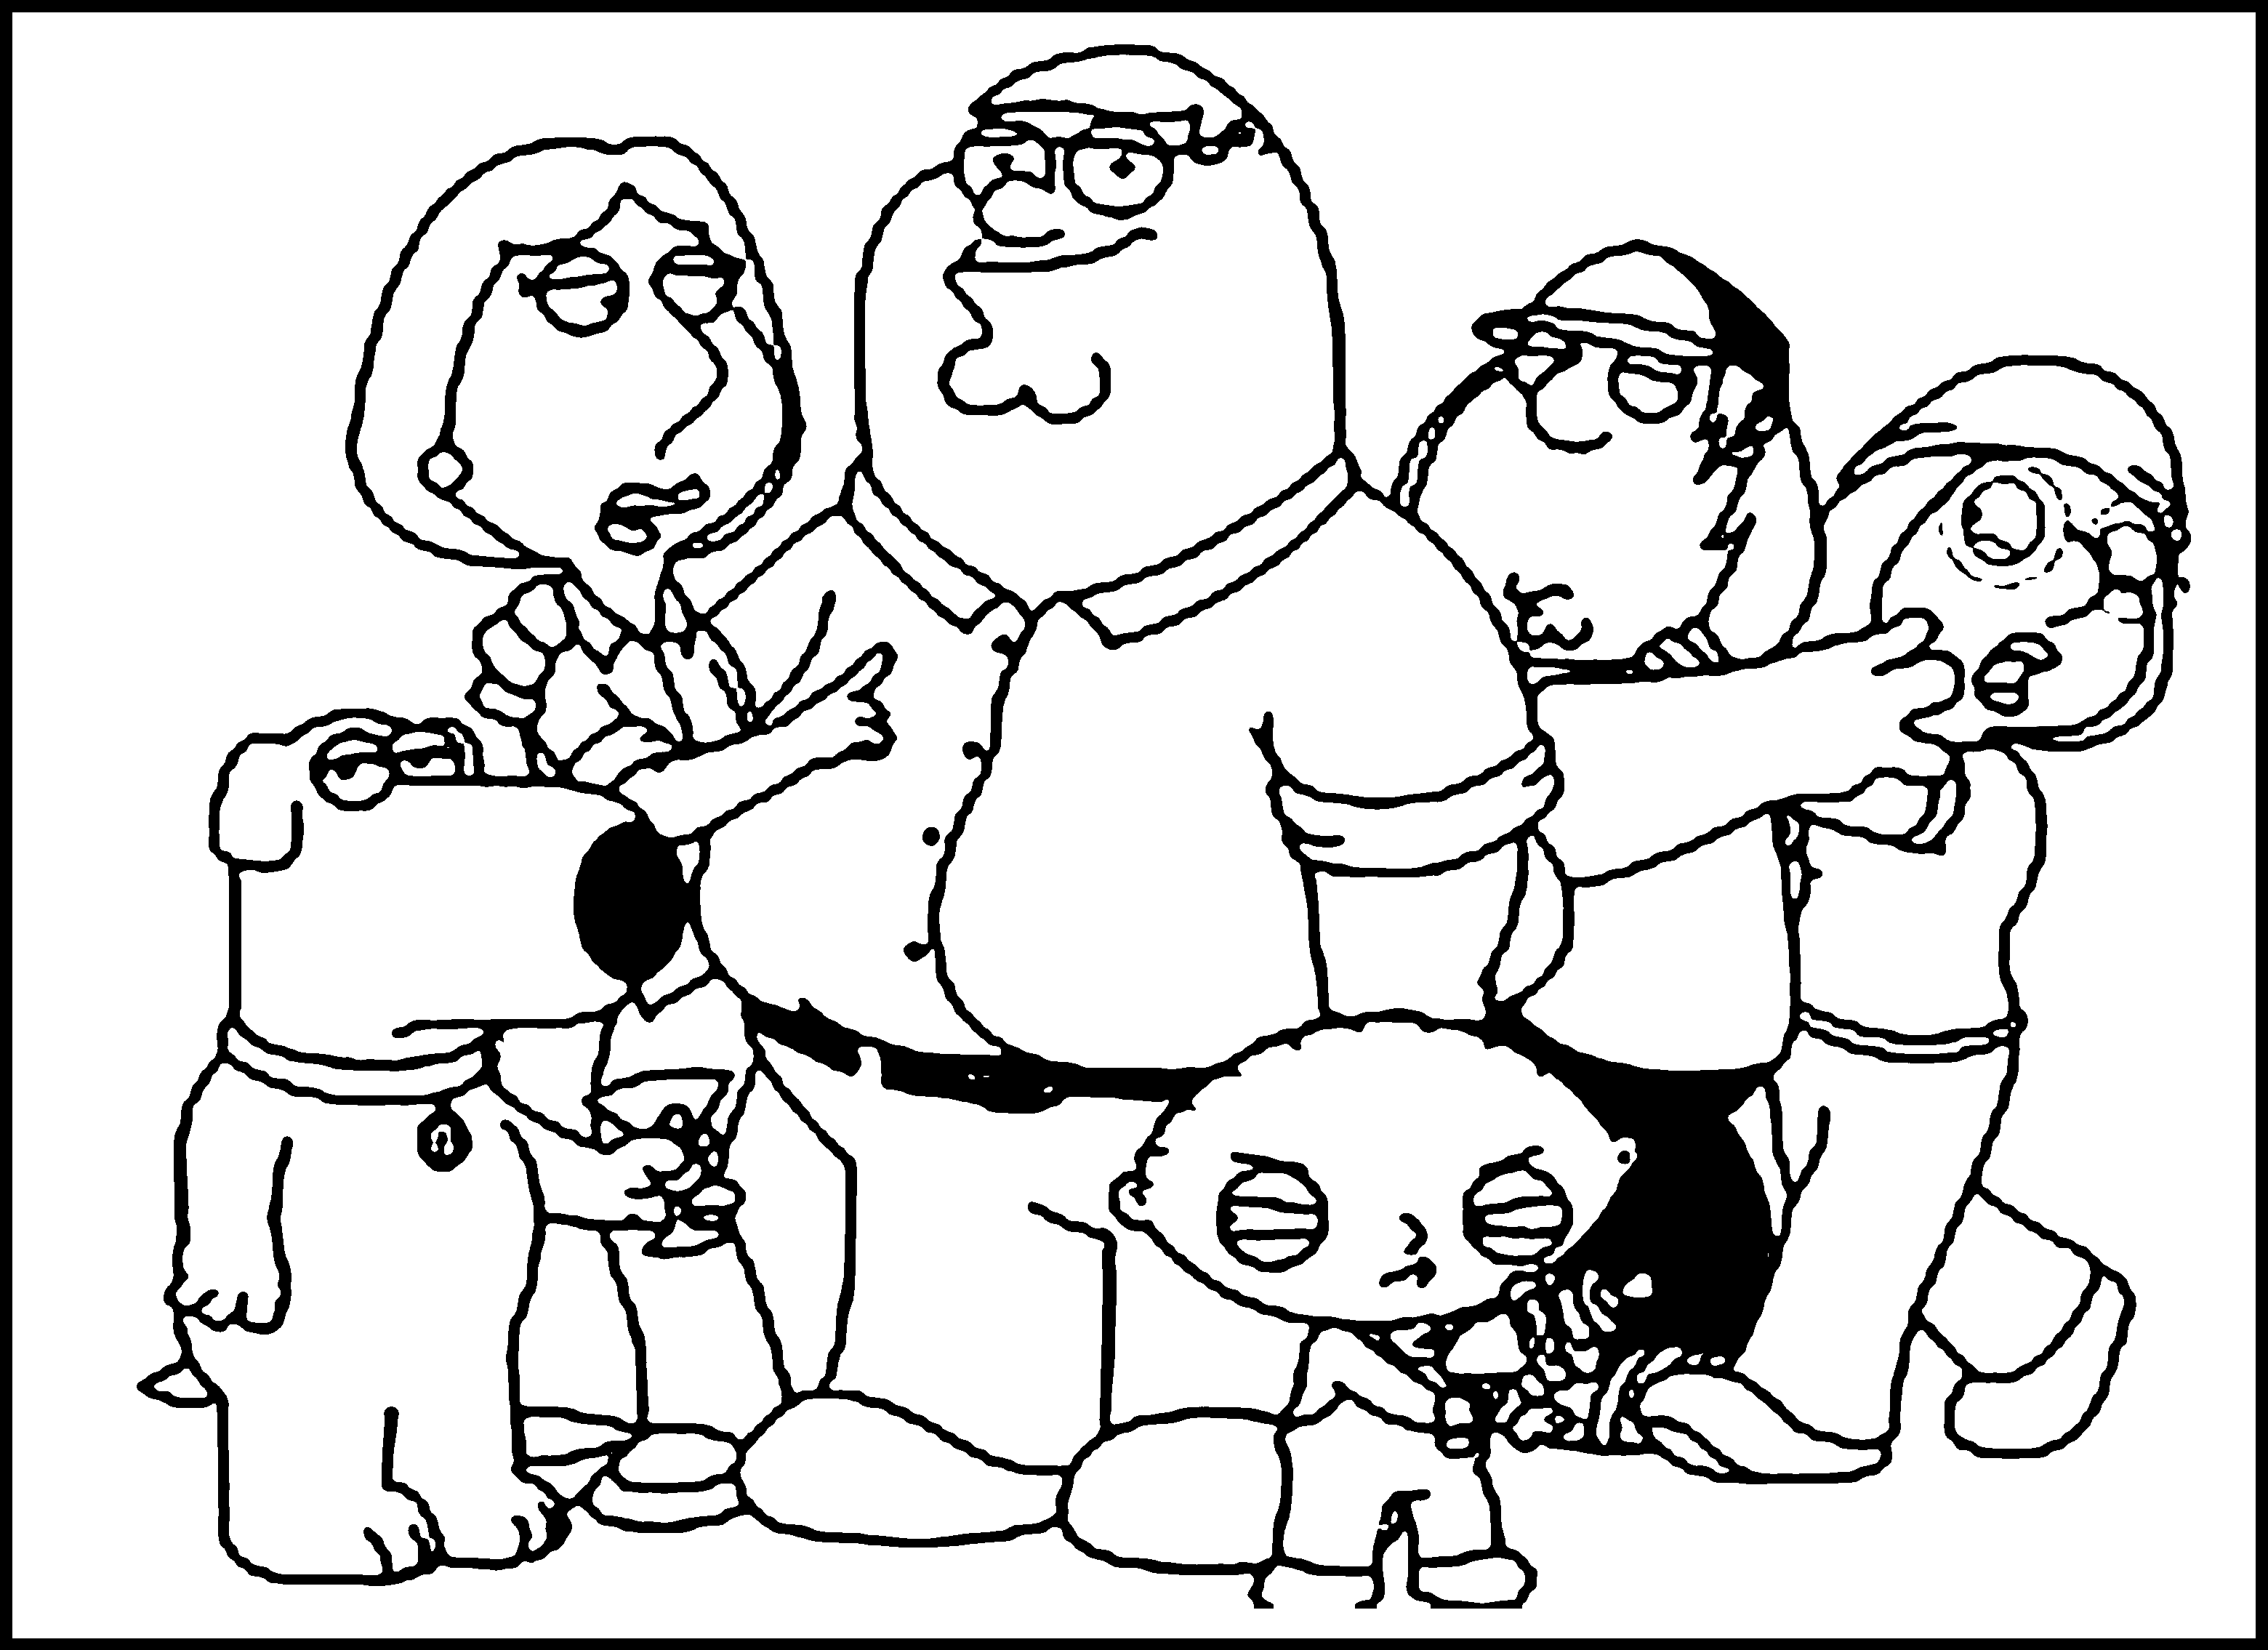 family-guy-coloring-pages-to-print | Free Coloring Pages on Masivy ...